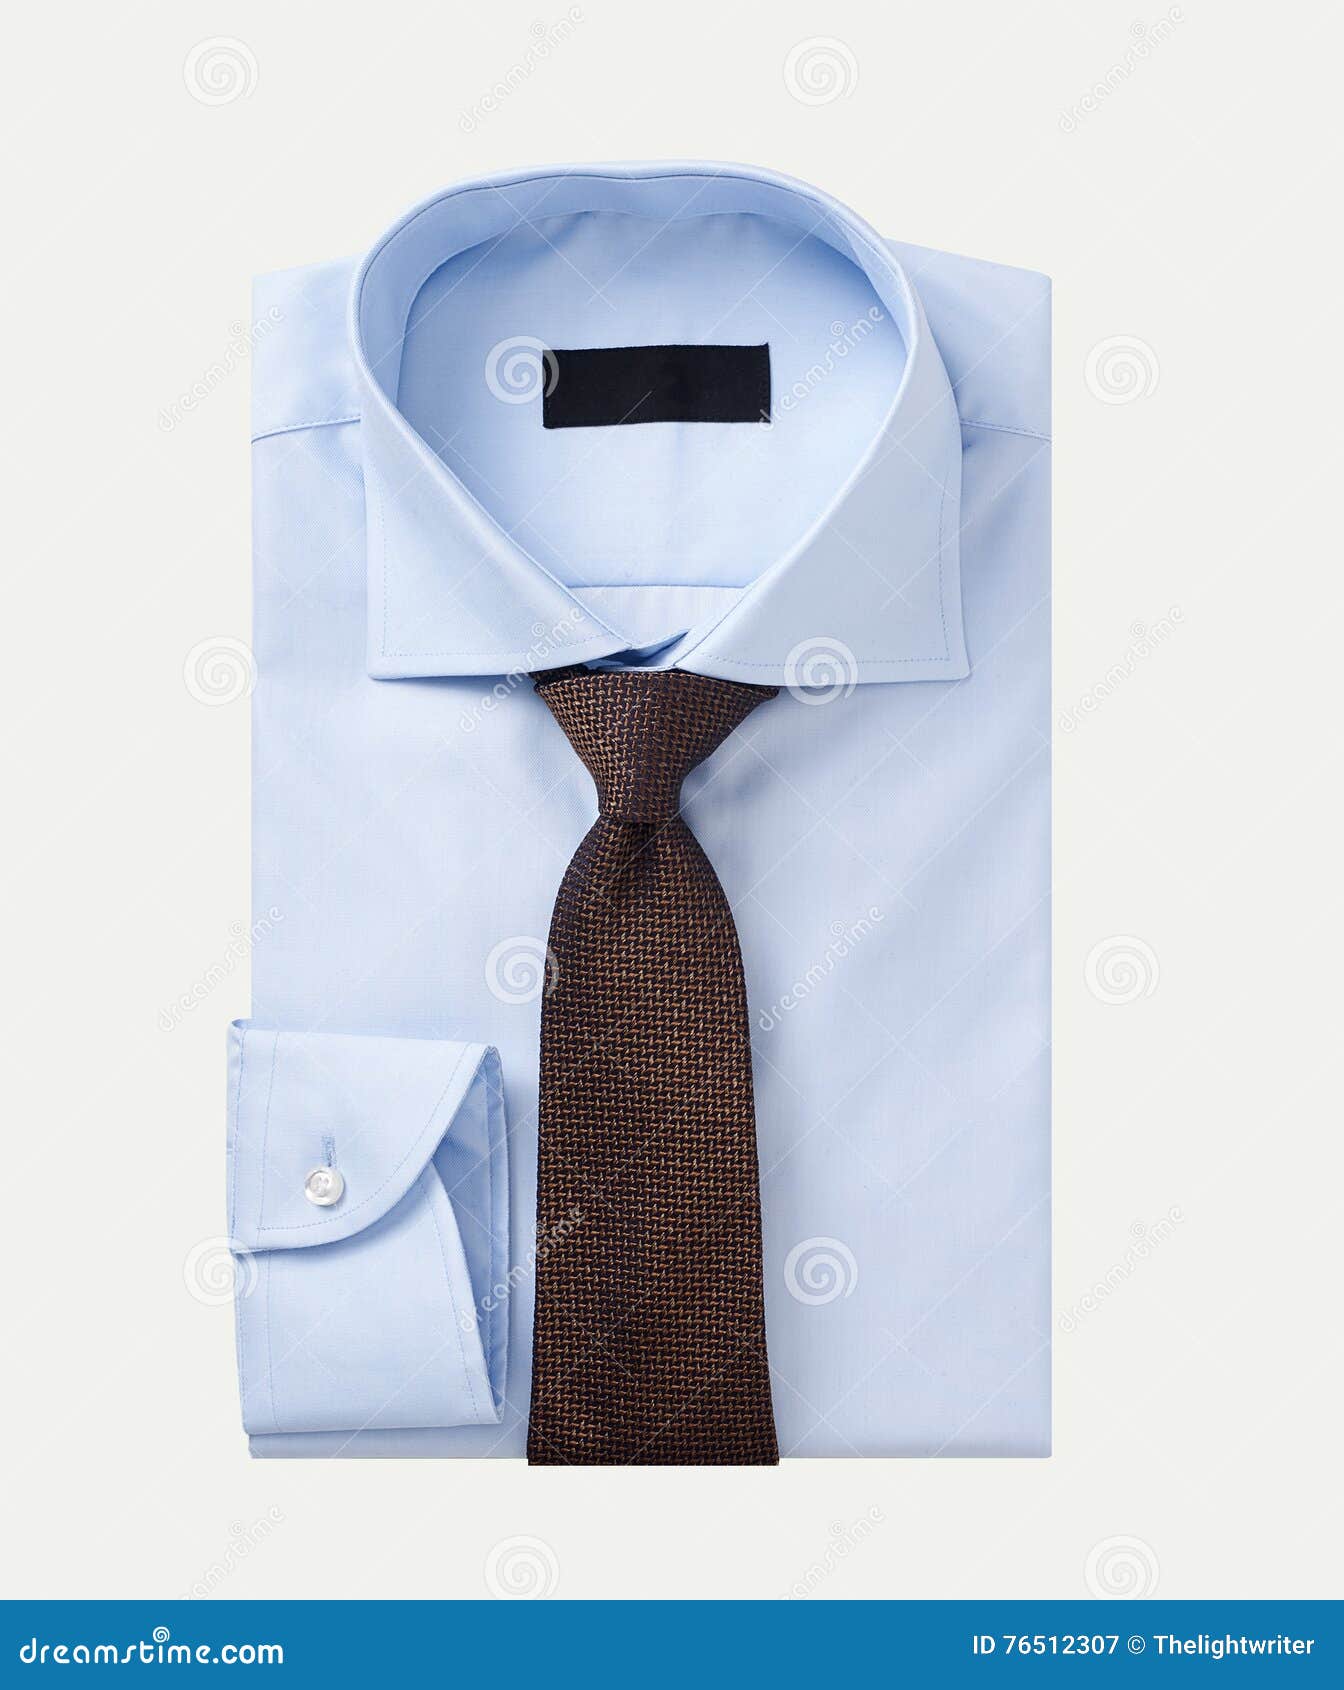 Men Shirt Clothing with Tie Isolated on White Stock Image - Image of ...